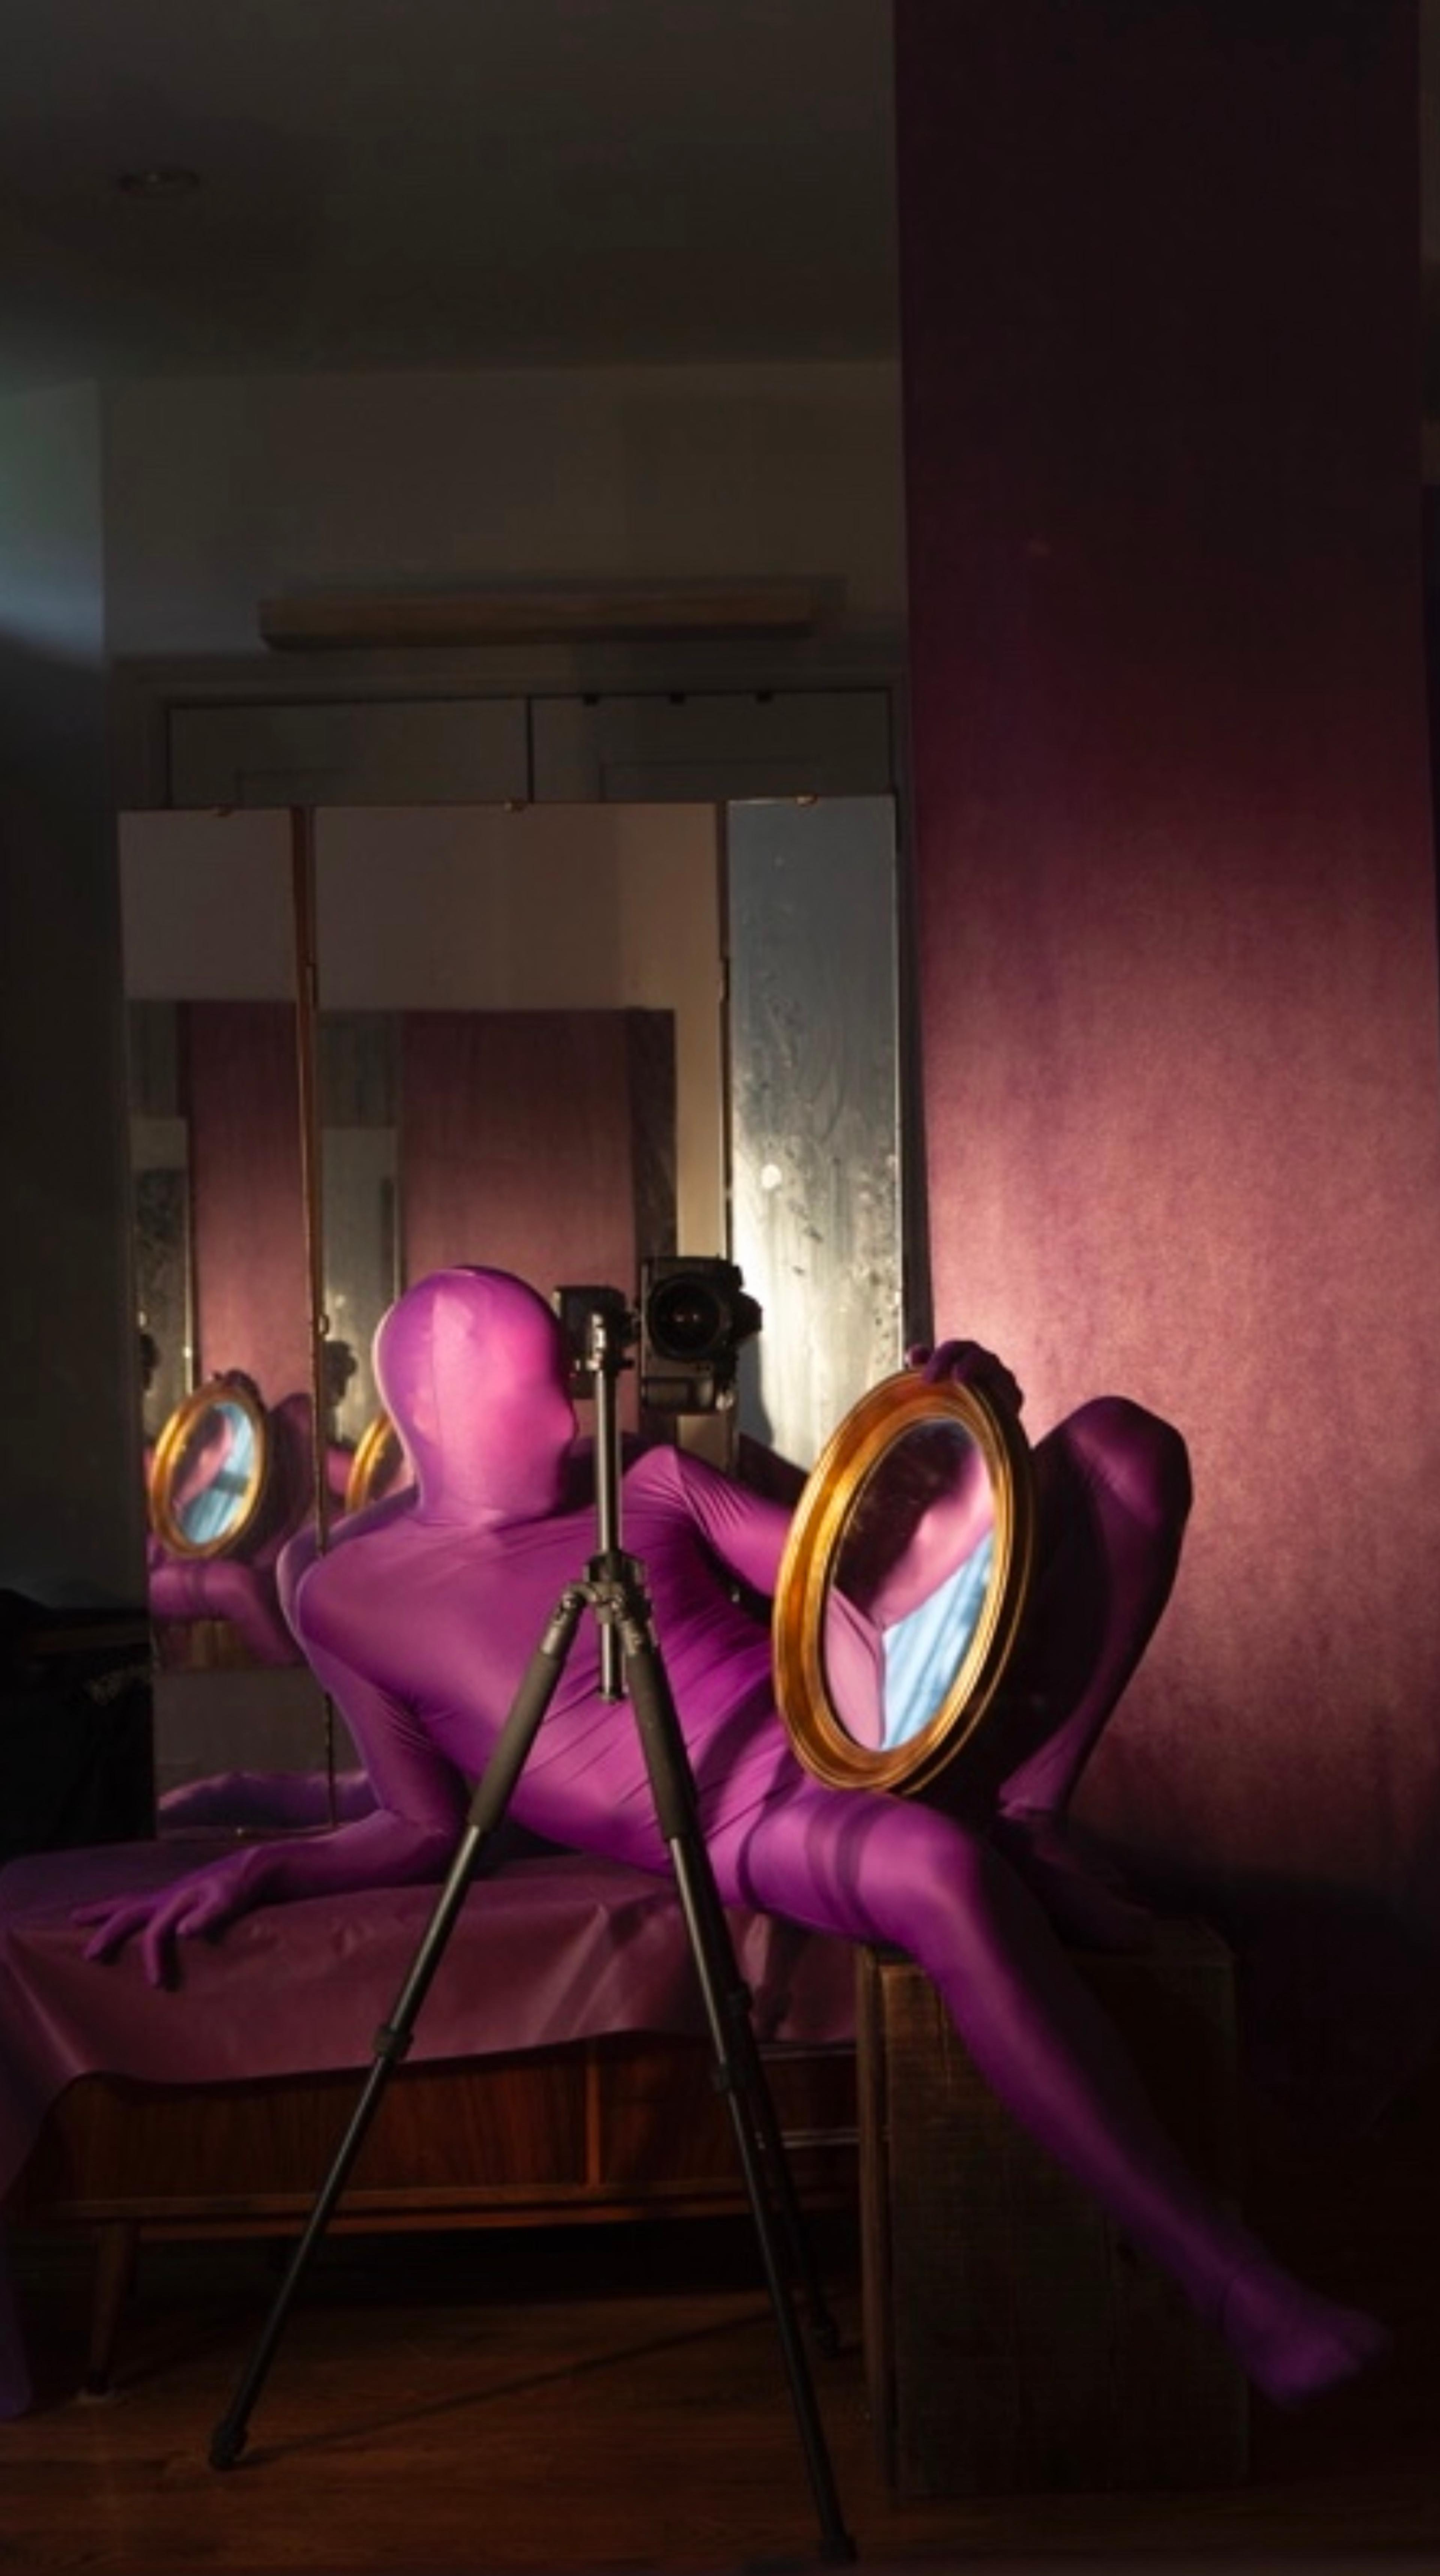 A photograph of a person in a pink full-body suit lounges in front of a camera and a mirror